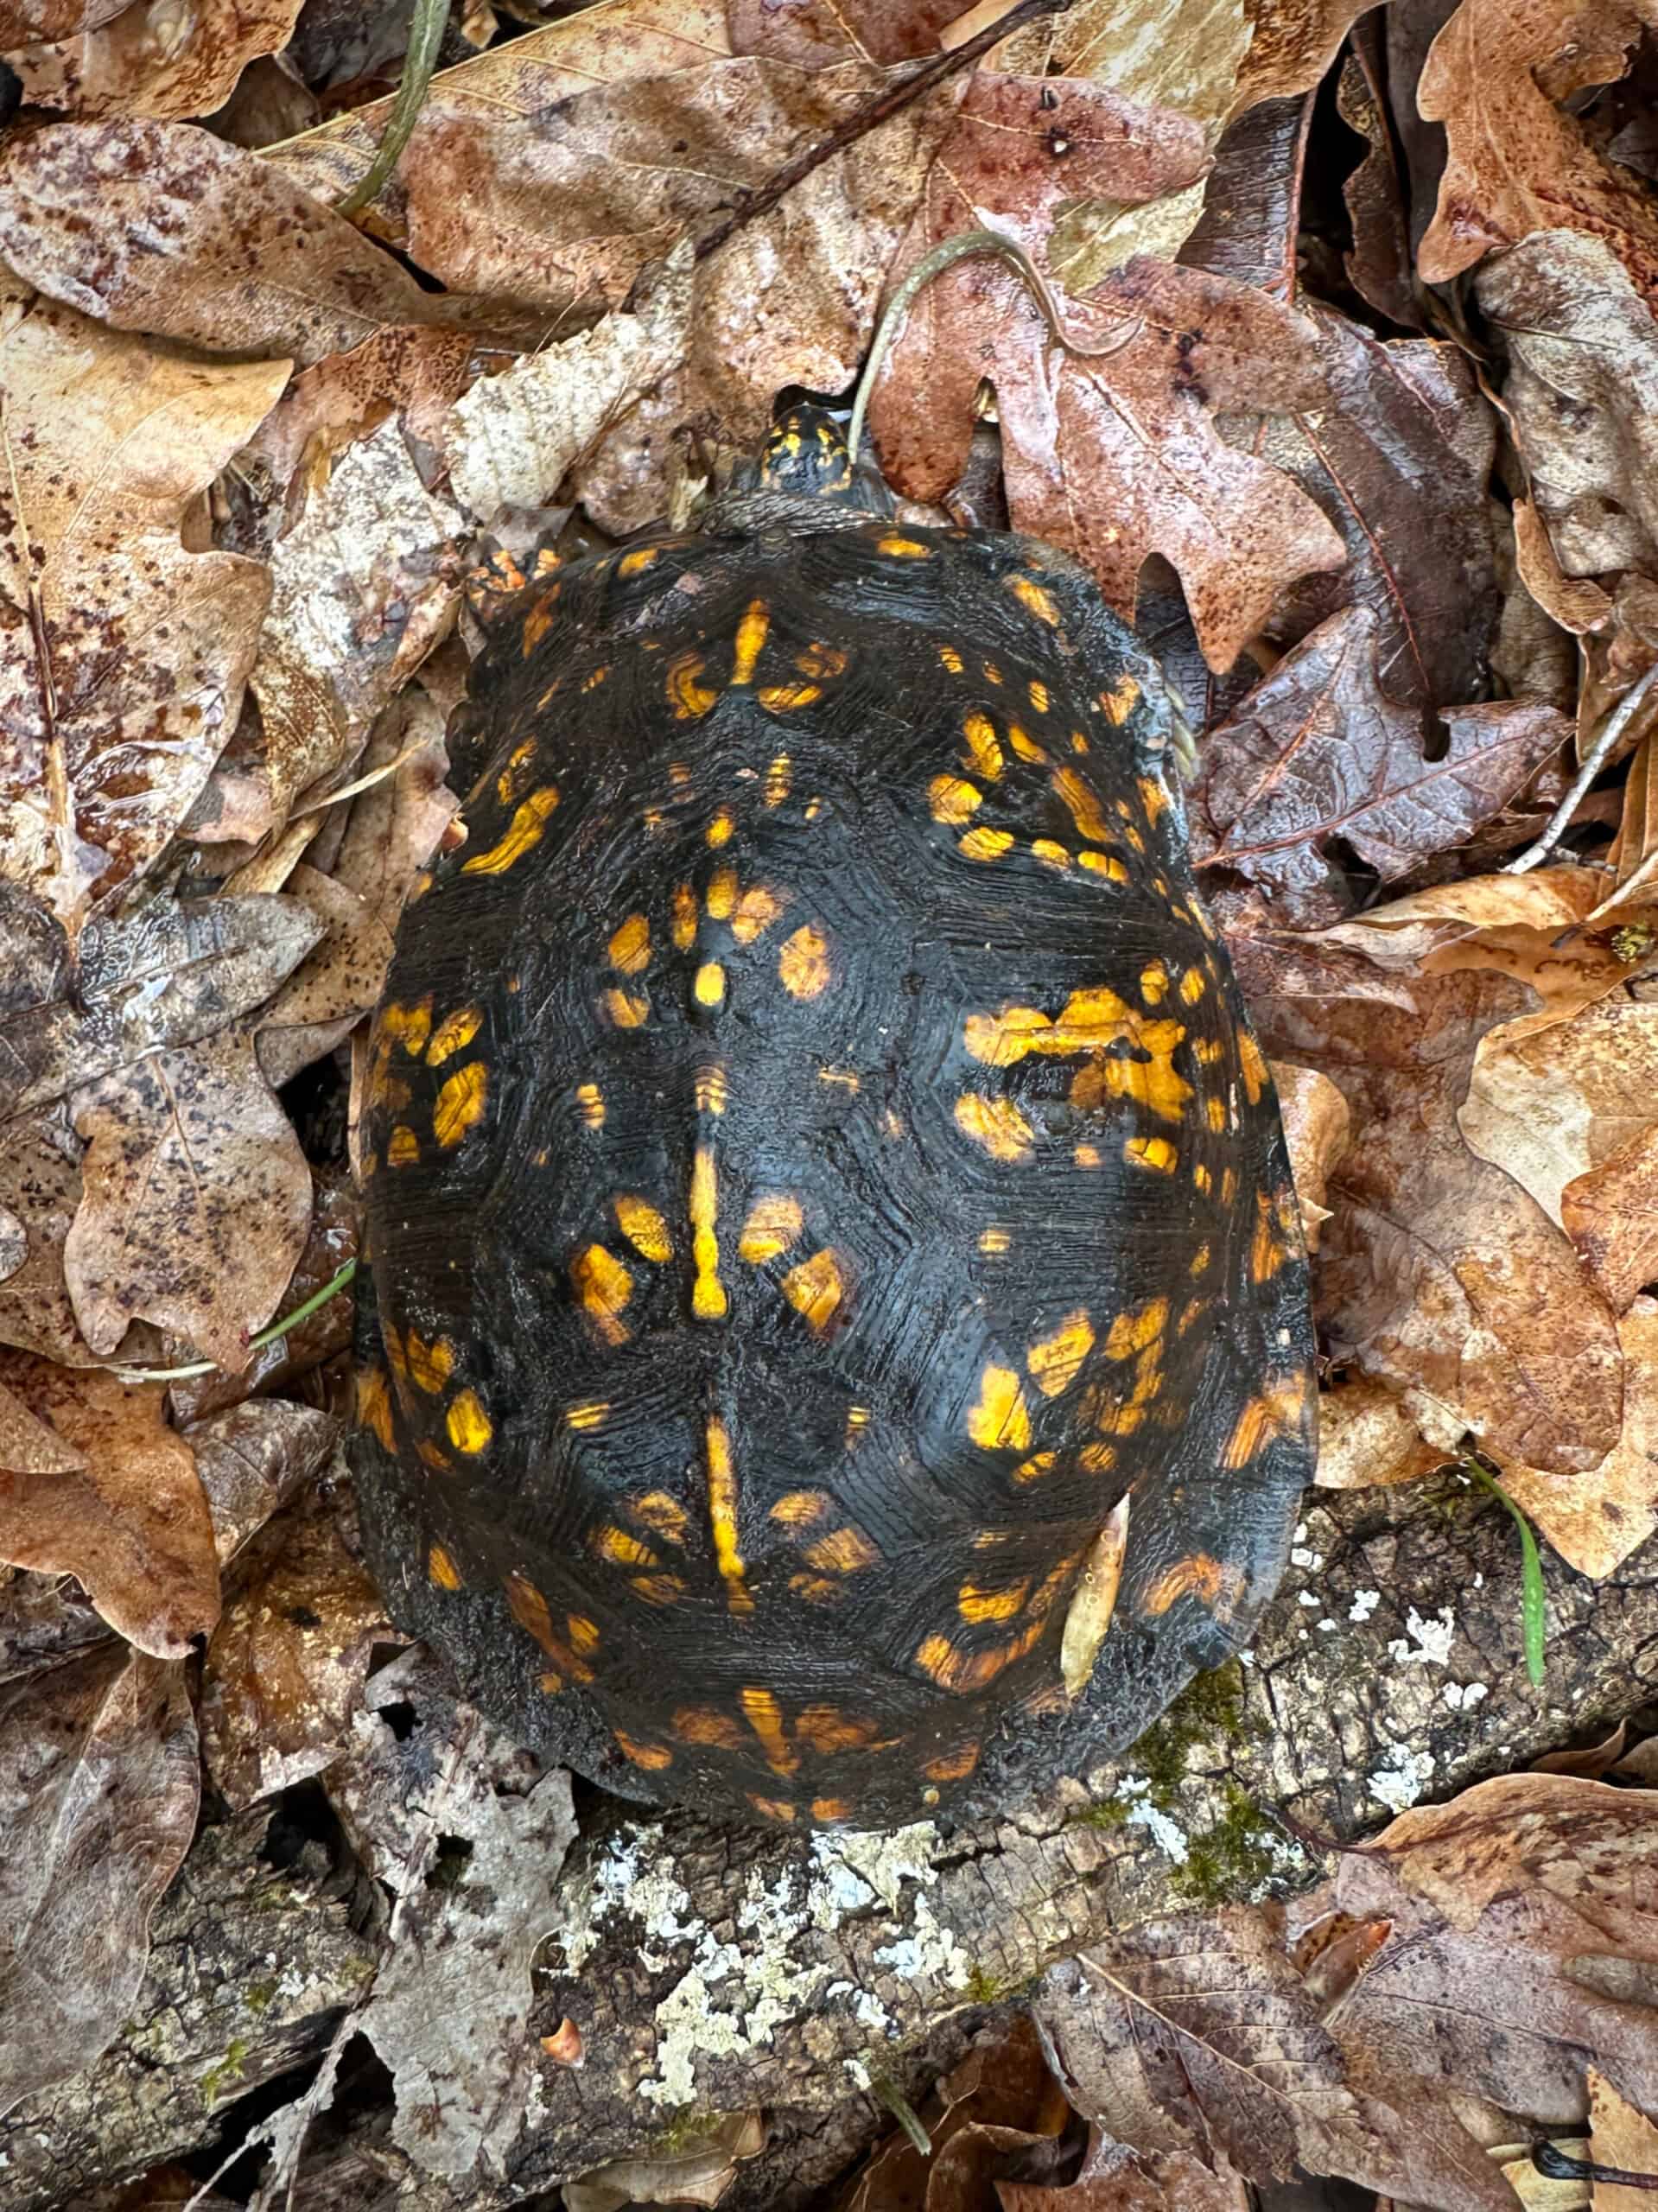 Box turtle from above